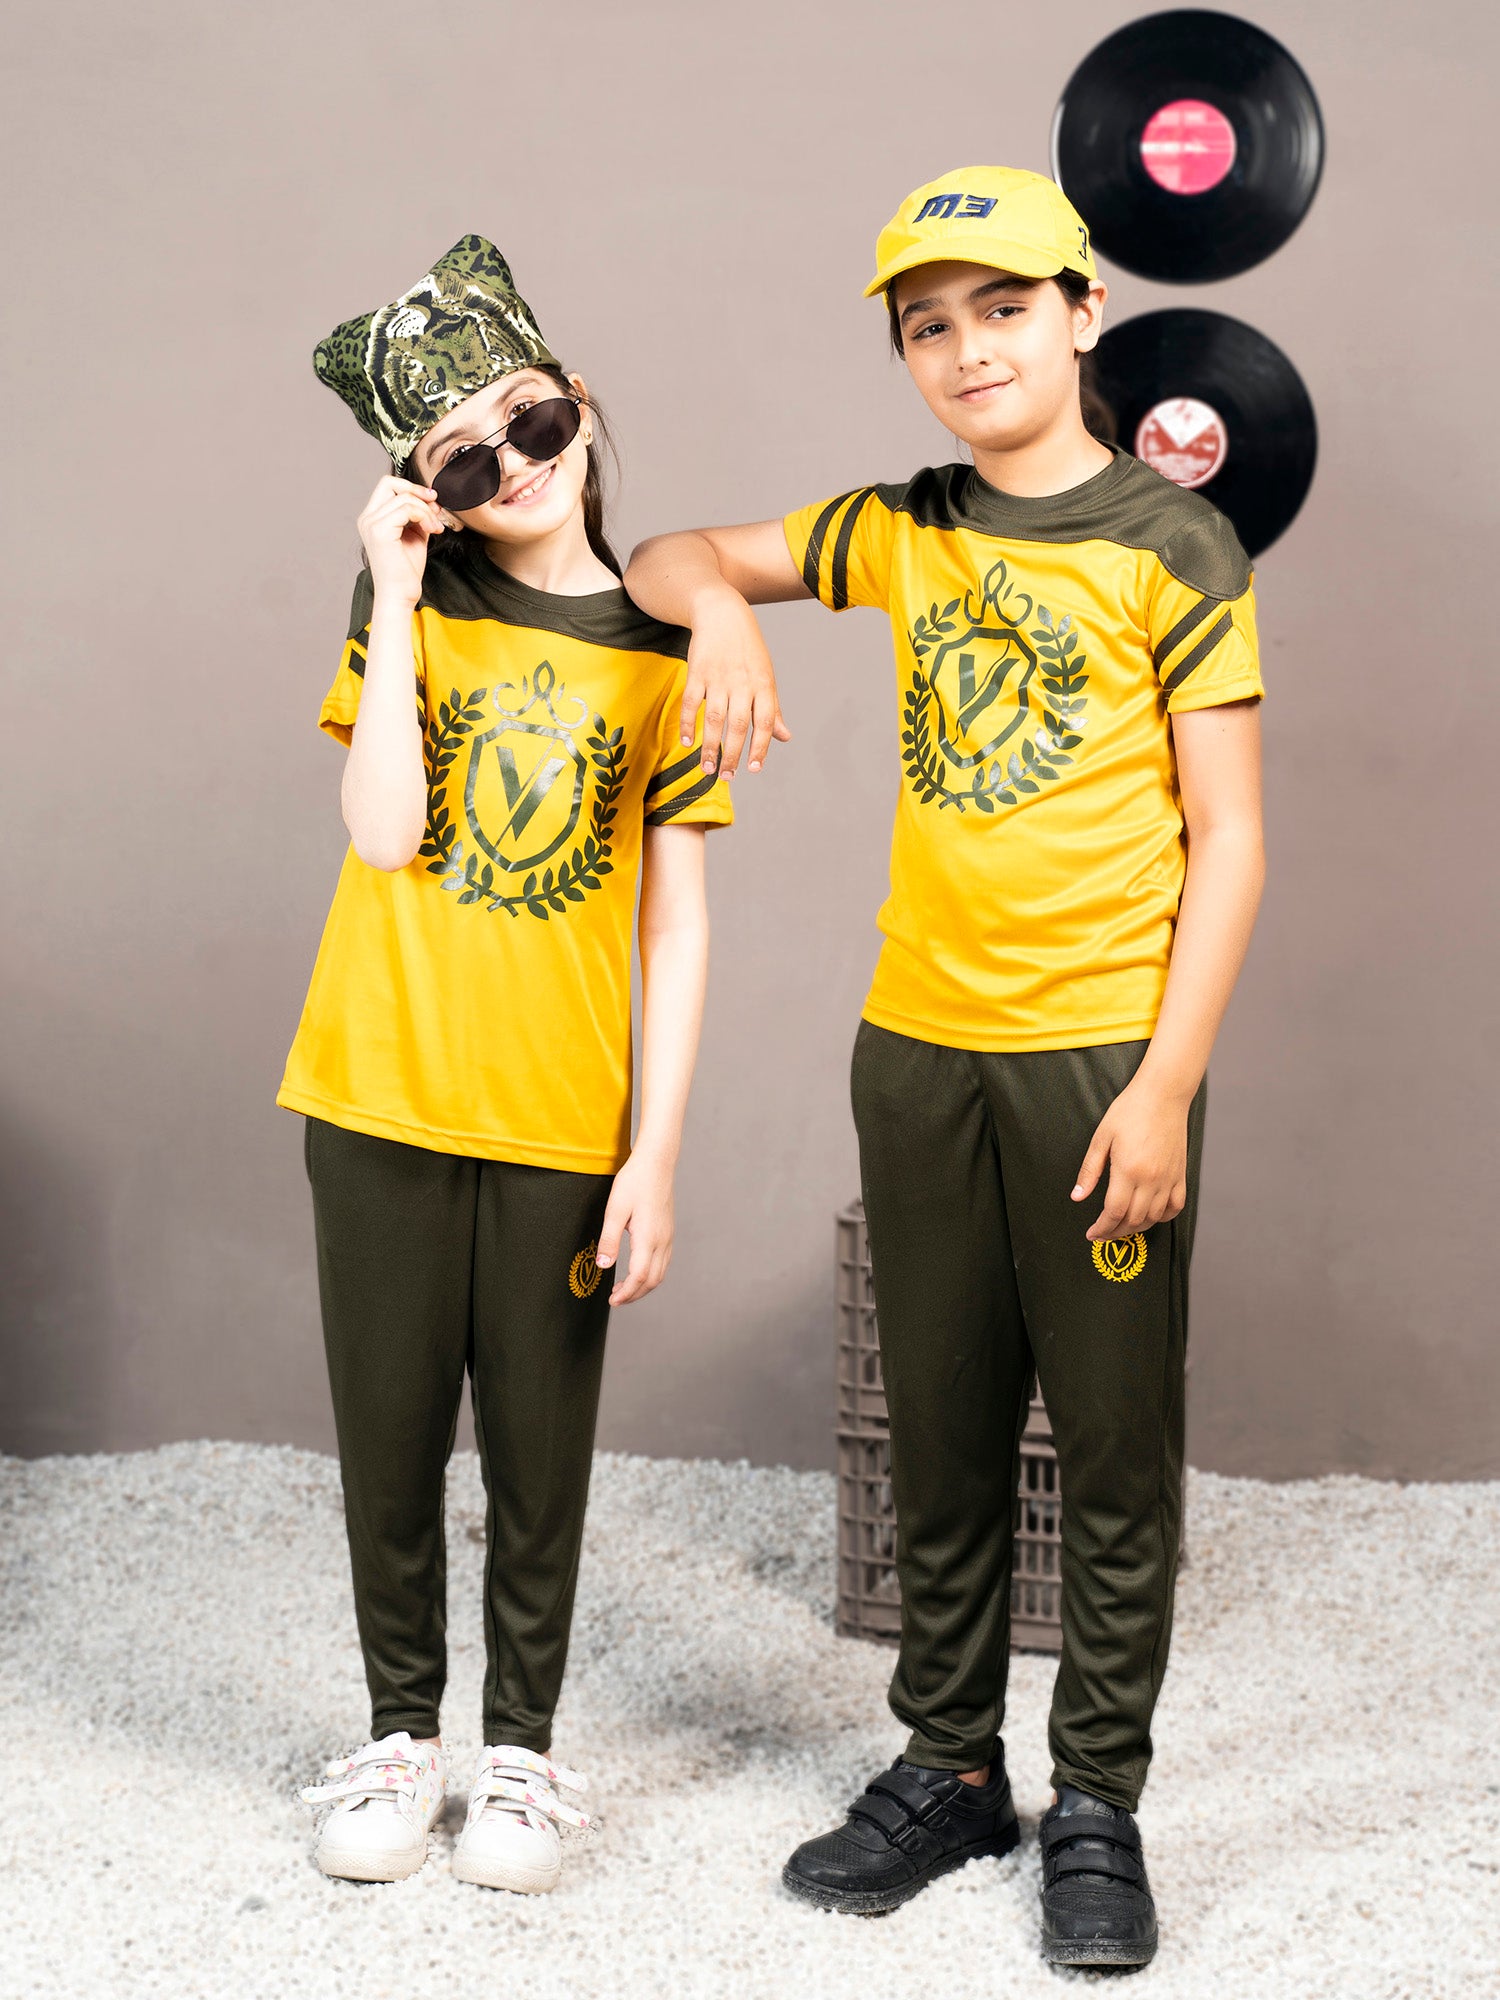 Tracksuit For Boys & Girls Poly athletic Fabric ART #VBTS08-C Yellow & Army Green